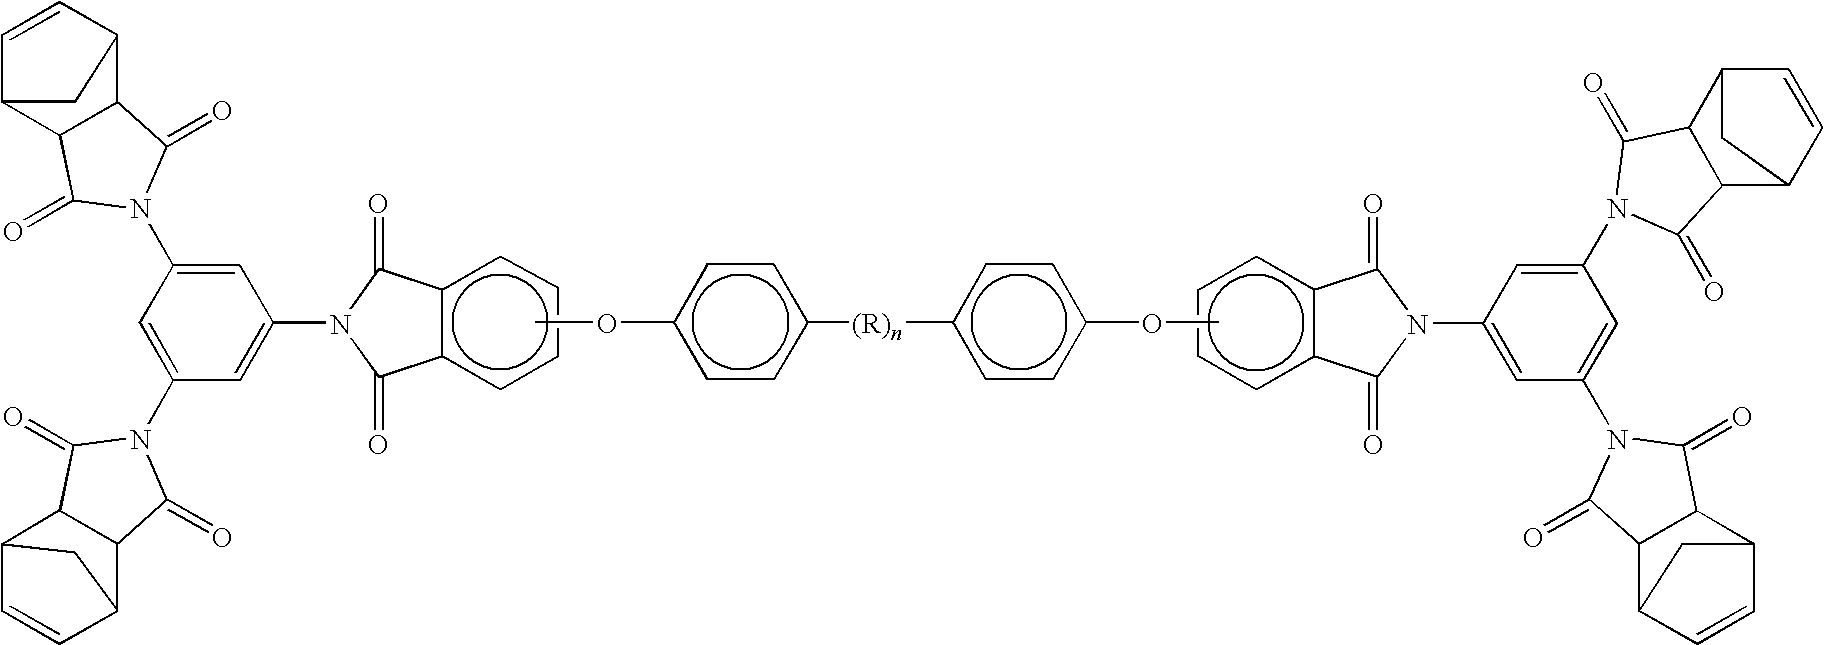 Single-step-processable polyimides